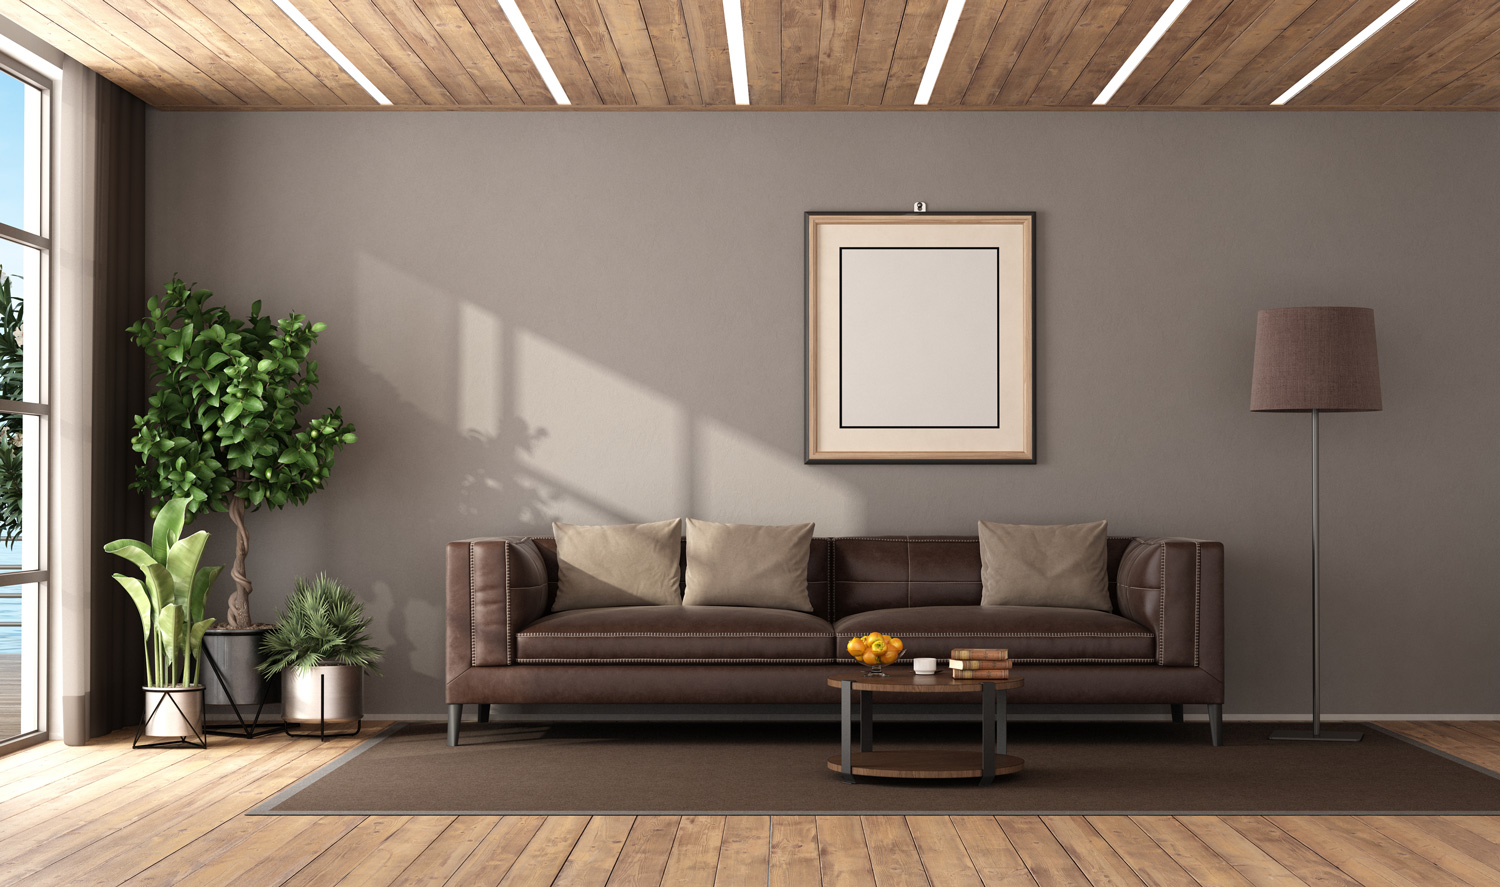 Modern living room with brown leather sofa and led light on wooden ceiling